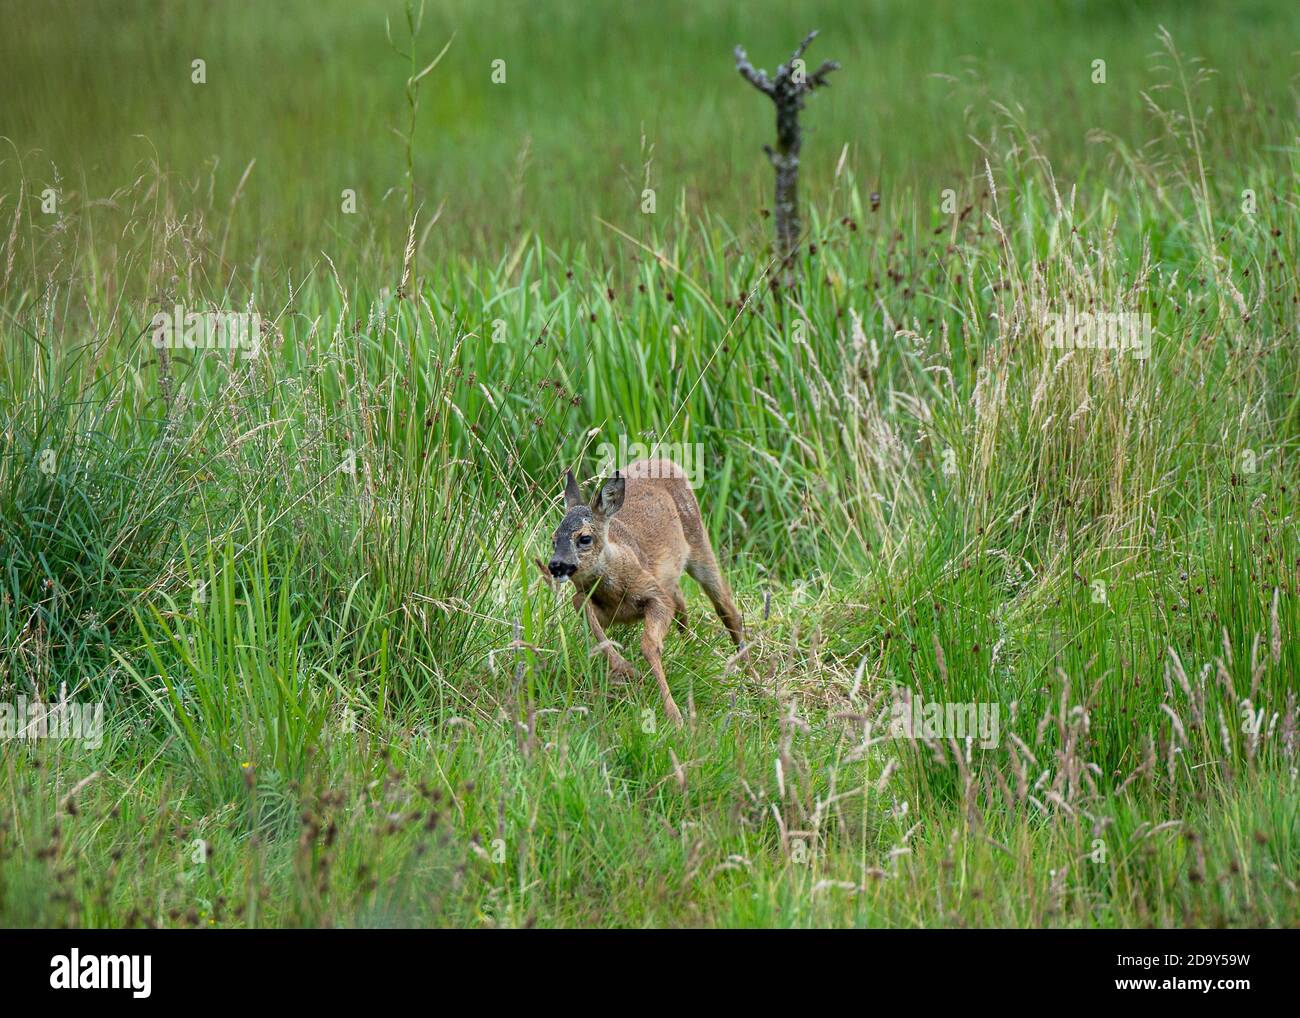 Deer Roe (Capreolus capreolus), female standing in long grass, Threave NTS estate, Castle Douglas, Dumfries and galloway, SW Scotland Stock Photo